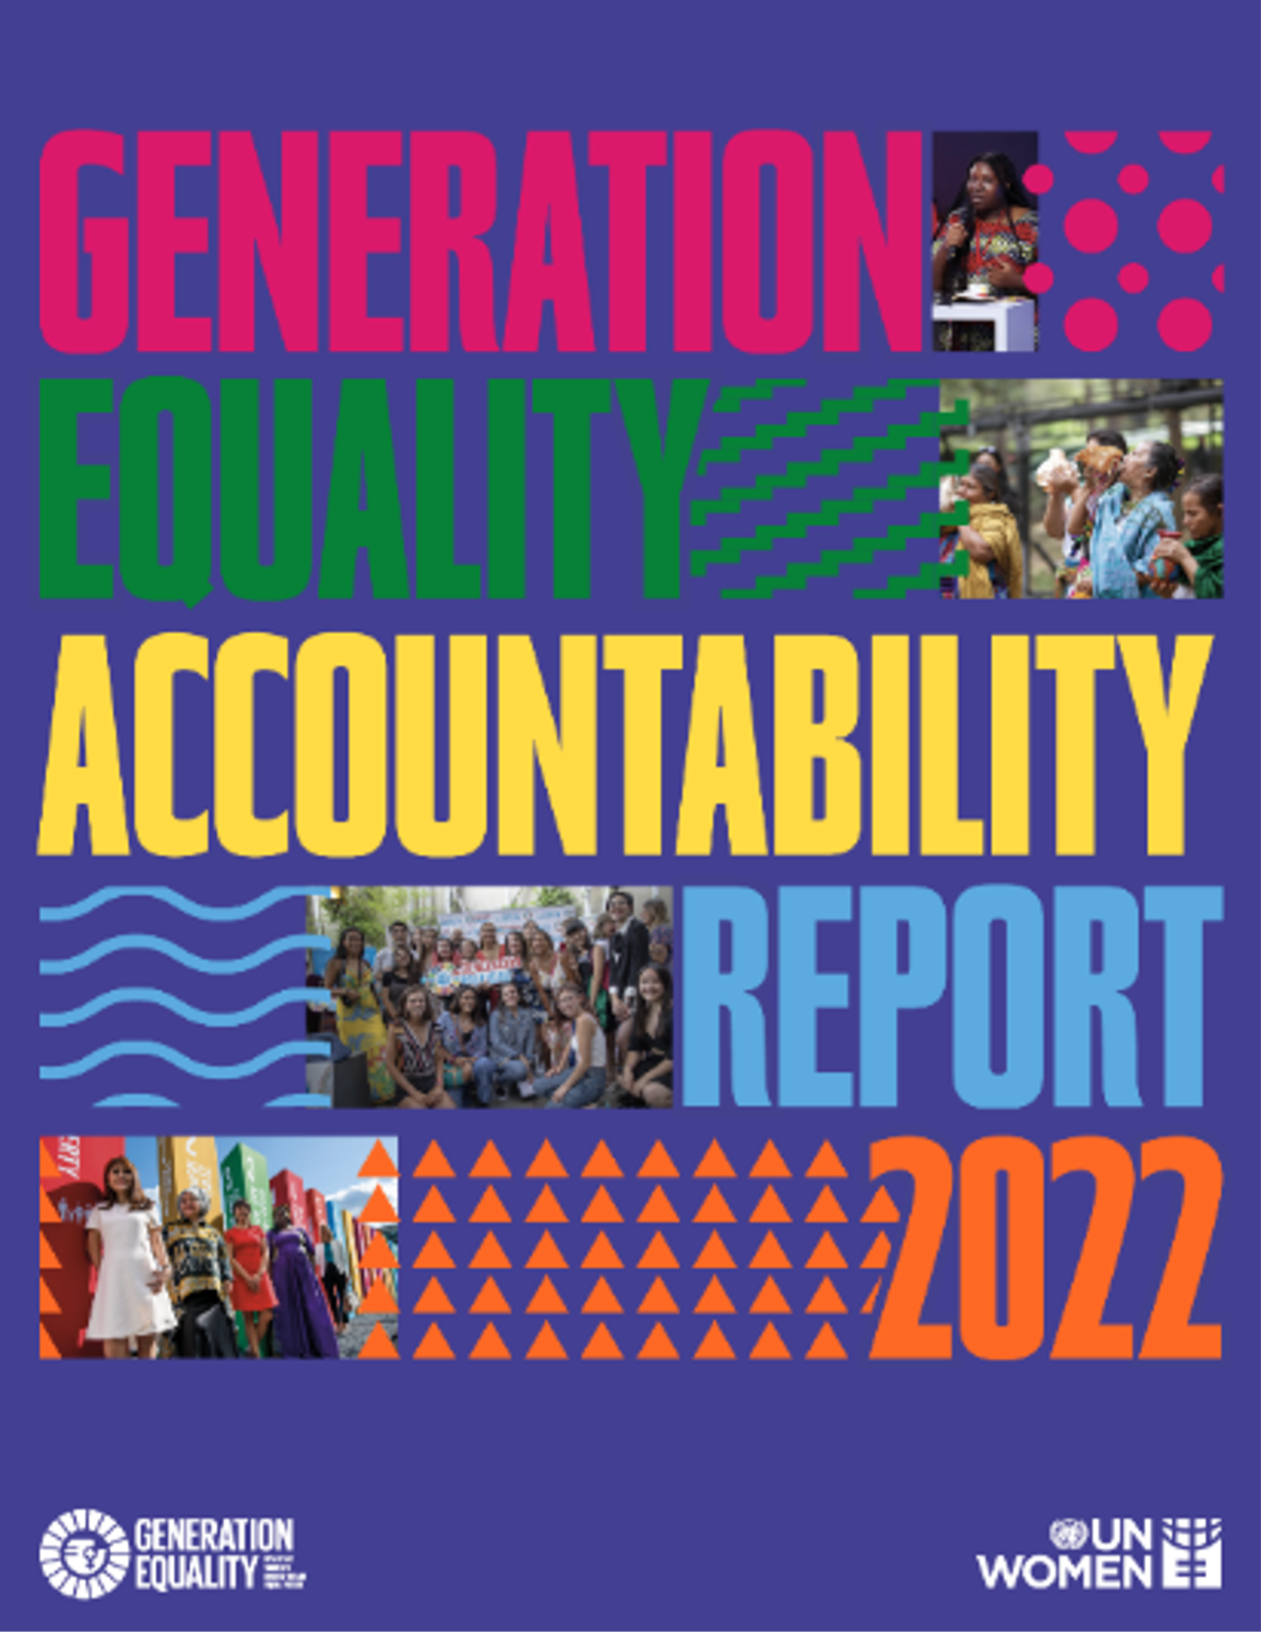 Purple background with the words Generation Equality Accountability Report 2022 in pink, green, yellow, blue and orange with coloured shapes next to them. The Generation Equality logo is bottom left and UN Women logo bottom right